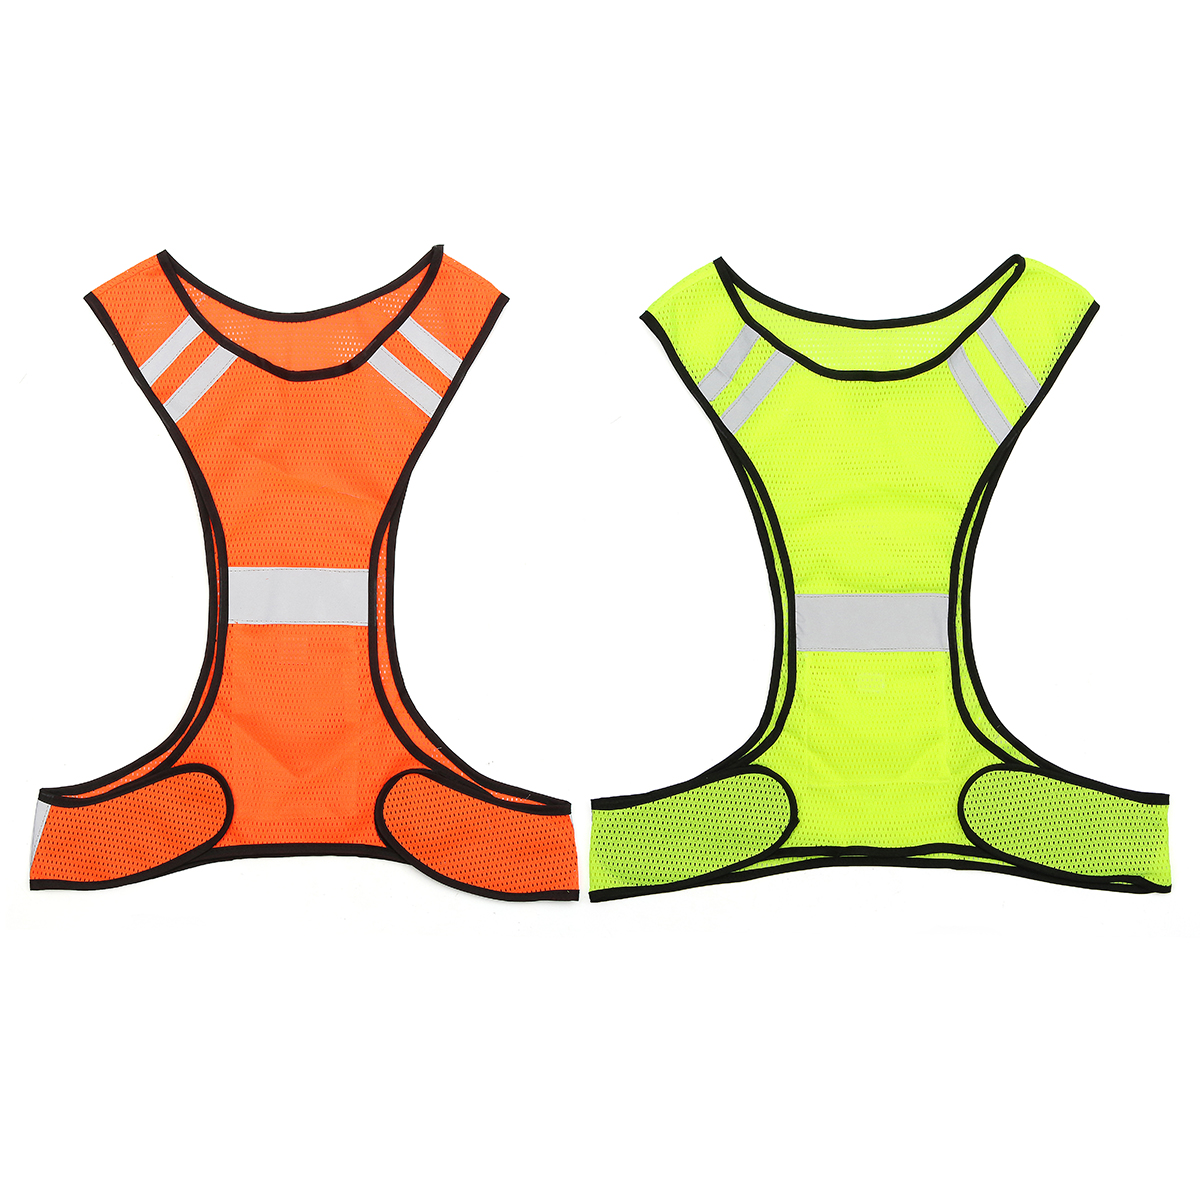 

Night Work High Visibility Reflective Vest Security Safety Gear Stripes Jacket